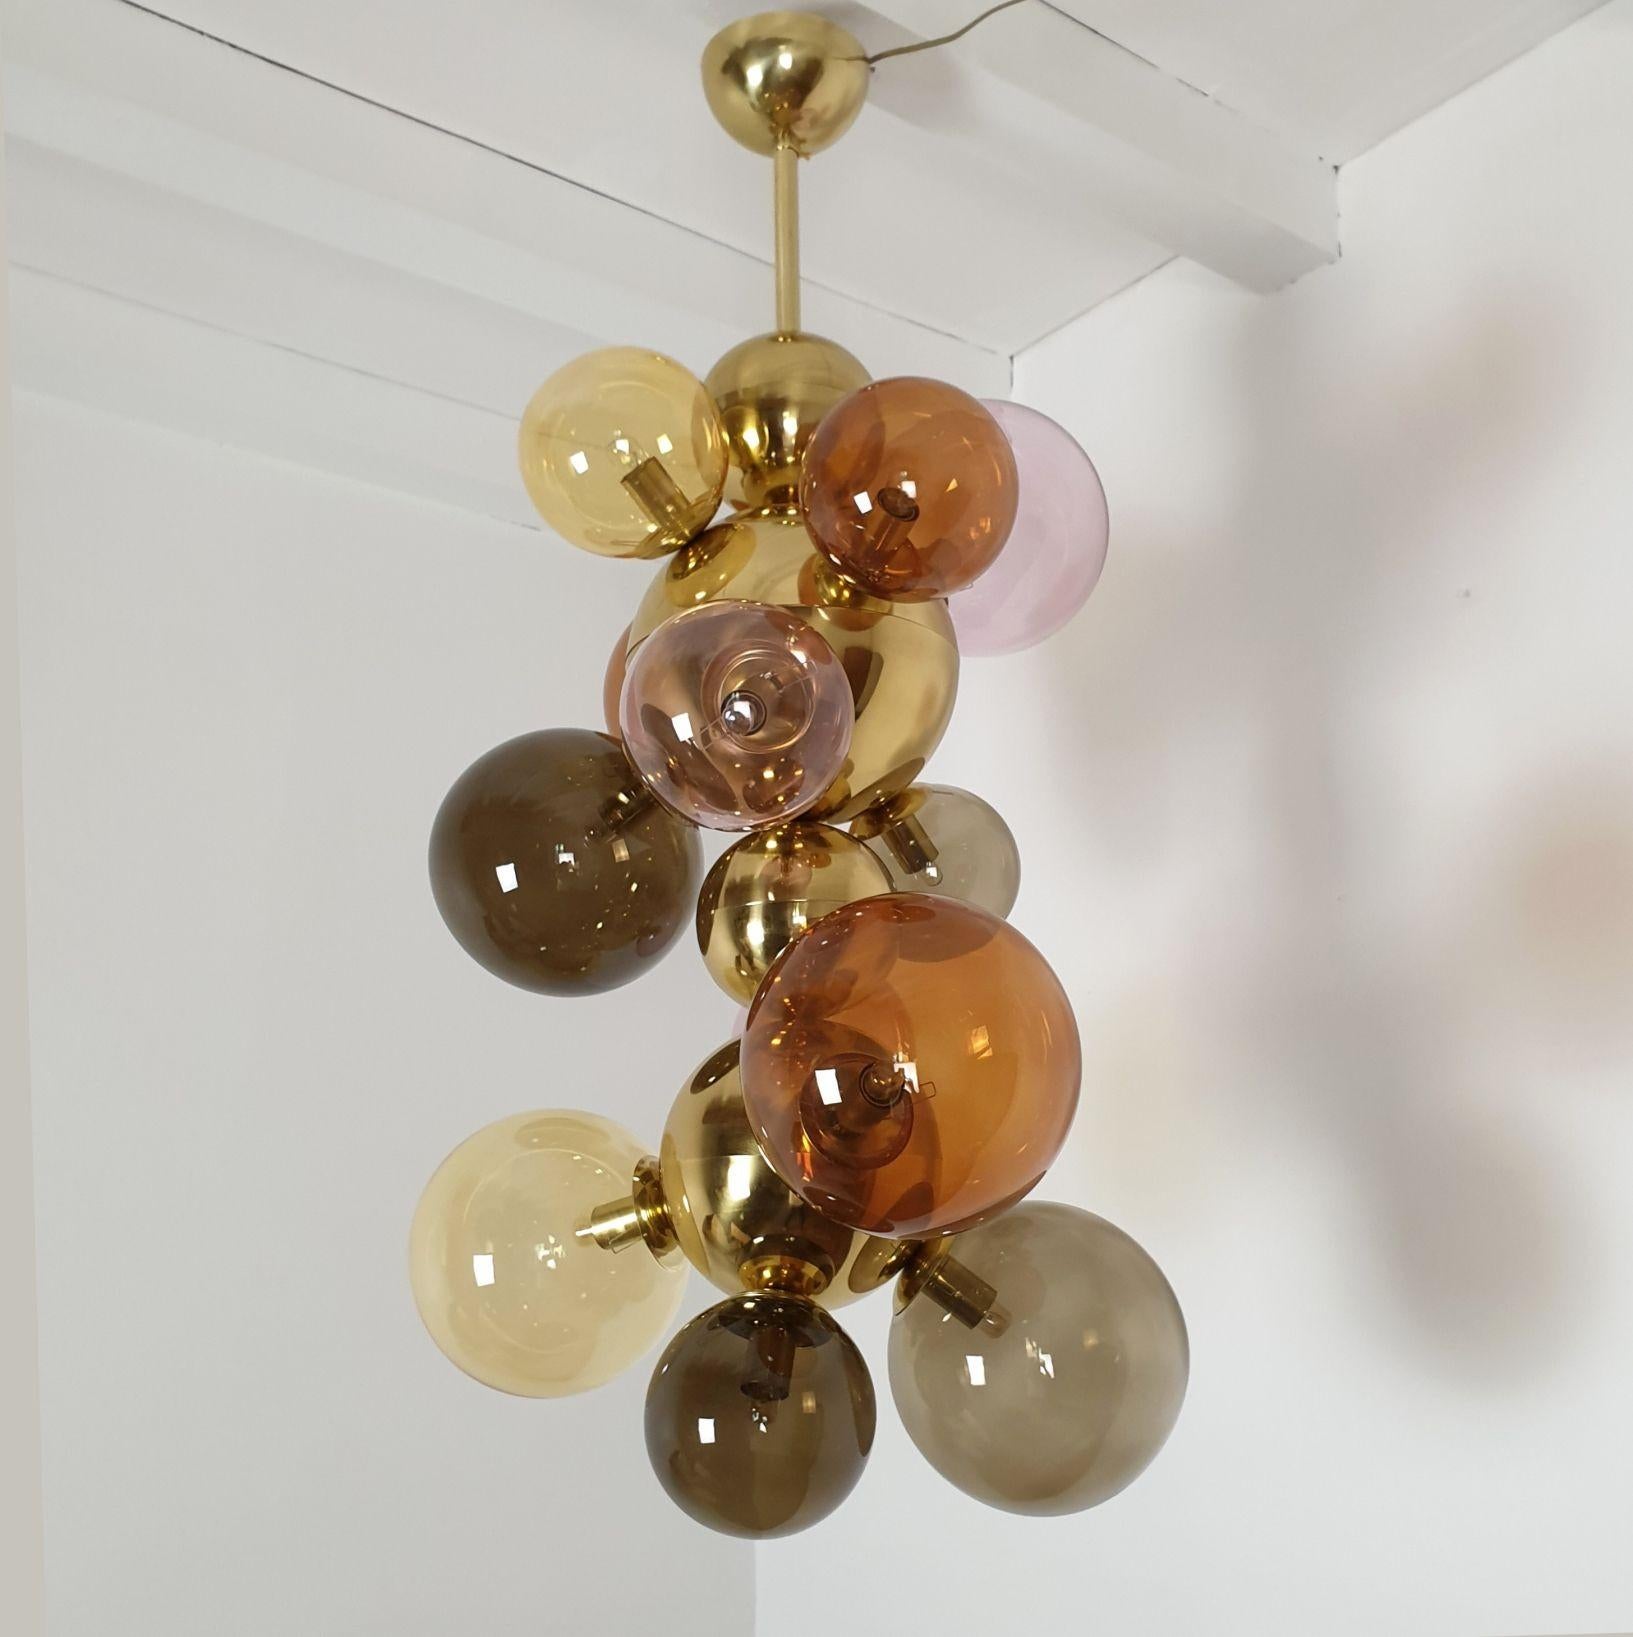 Large Mid Century Modern glass balls and brass chandelier or pendant light, Italy circa 2000s.
The chandelier is made of different sizes glass balls and polished brass balls and stem.
The glass balls are in different pastel colors: lilac, amber,